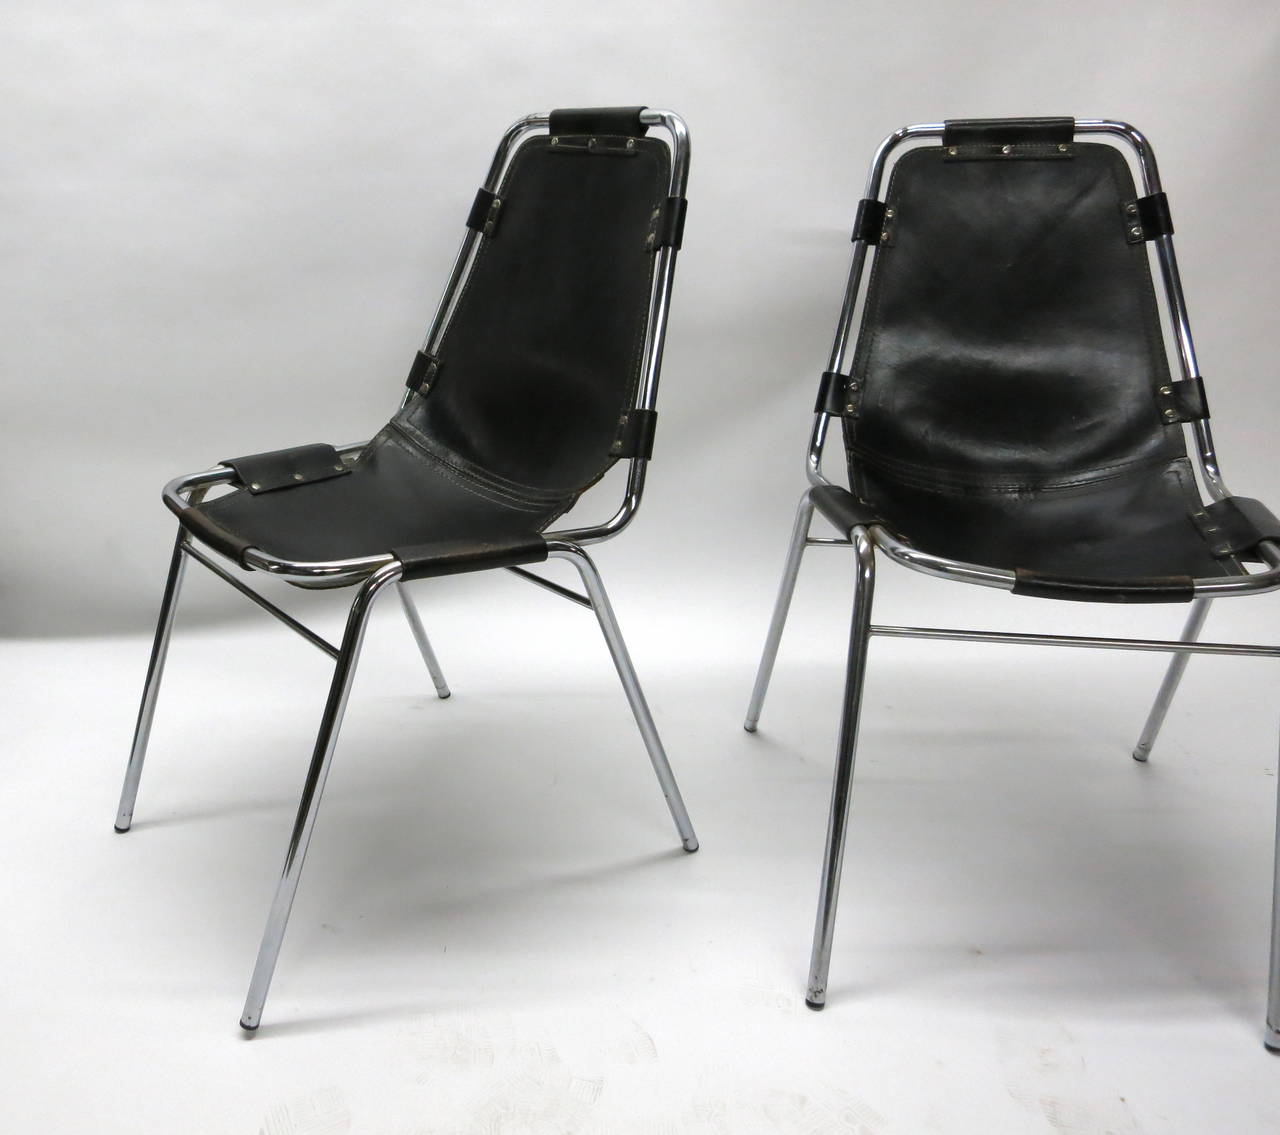 Mid-Century Modern Pair of Original Chairs by Charlotte Perriand, circa 1950 Made in France